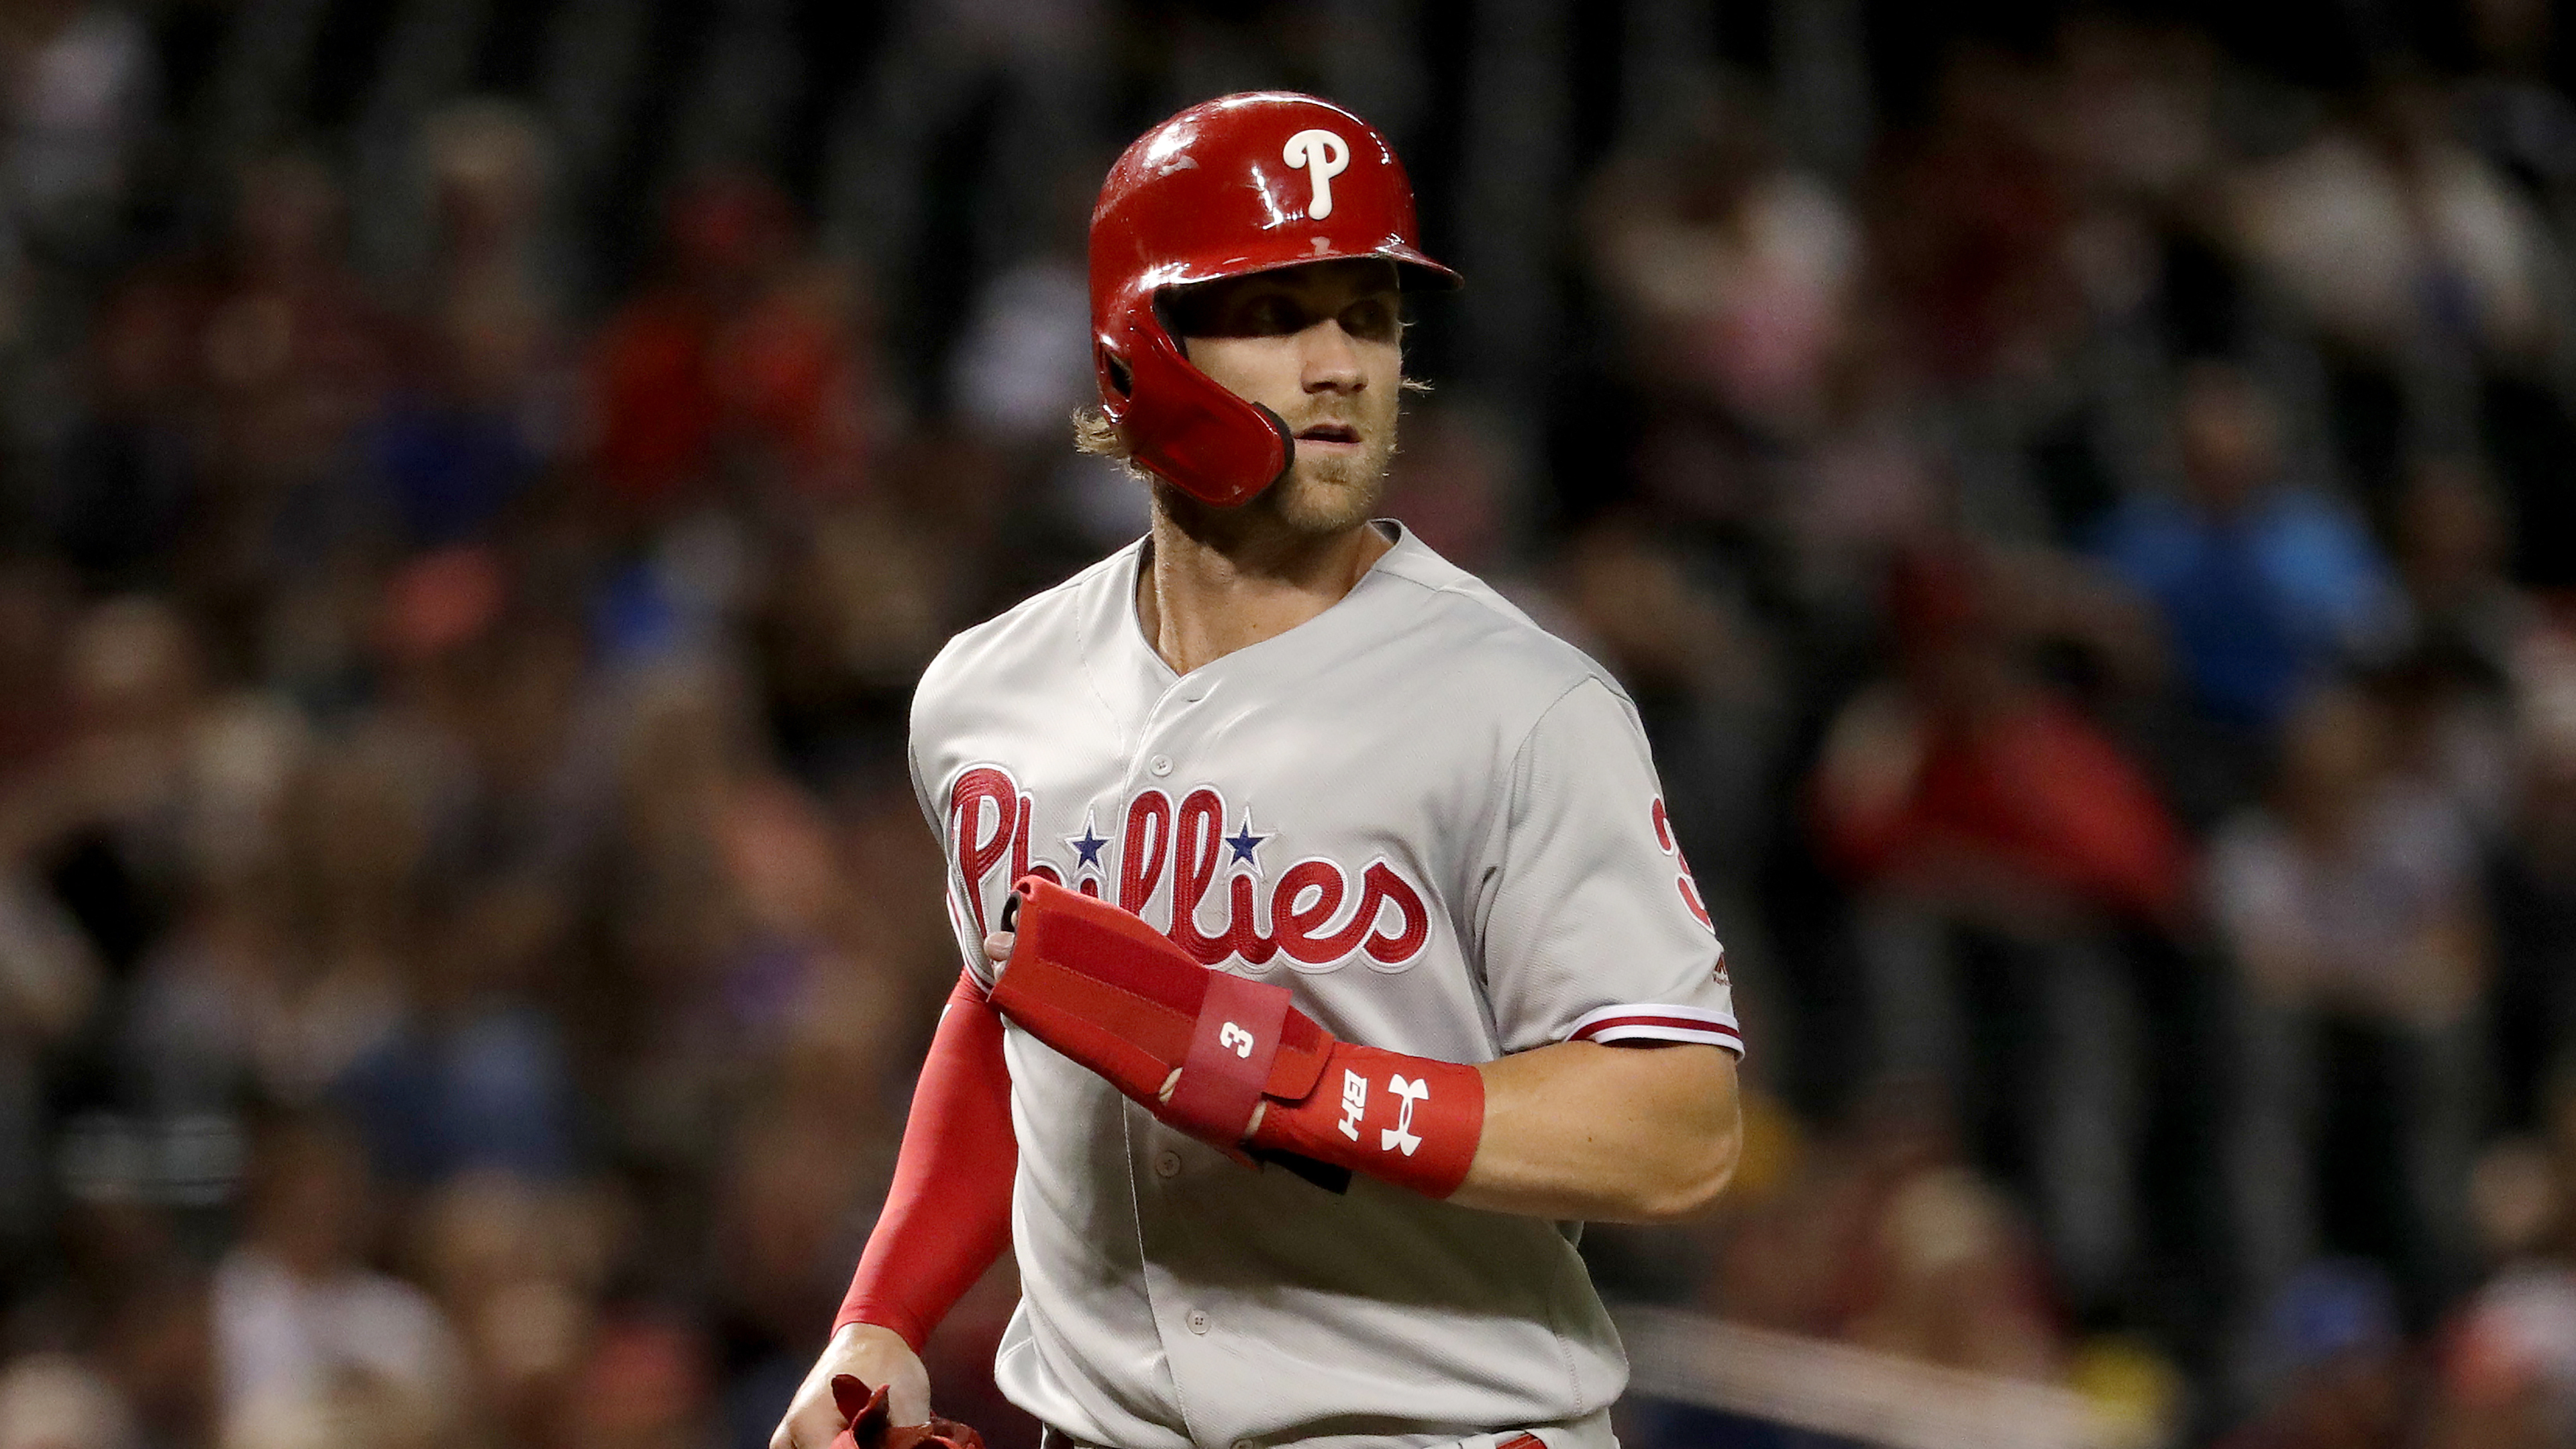 Chris 'Mad Dog' Russo rips Phillies' Bryce Harper, MLB stars for